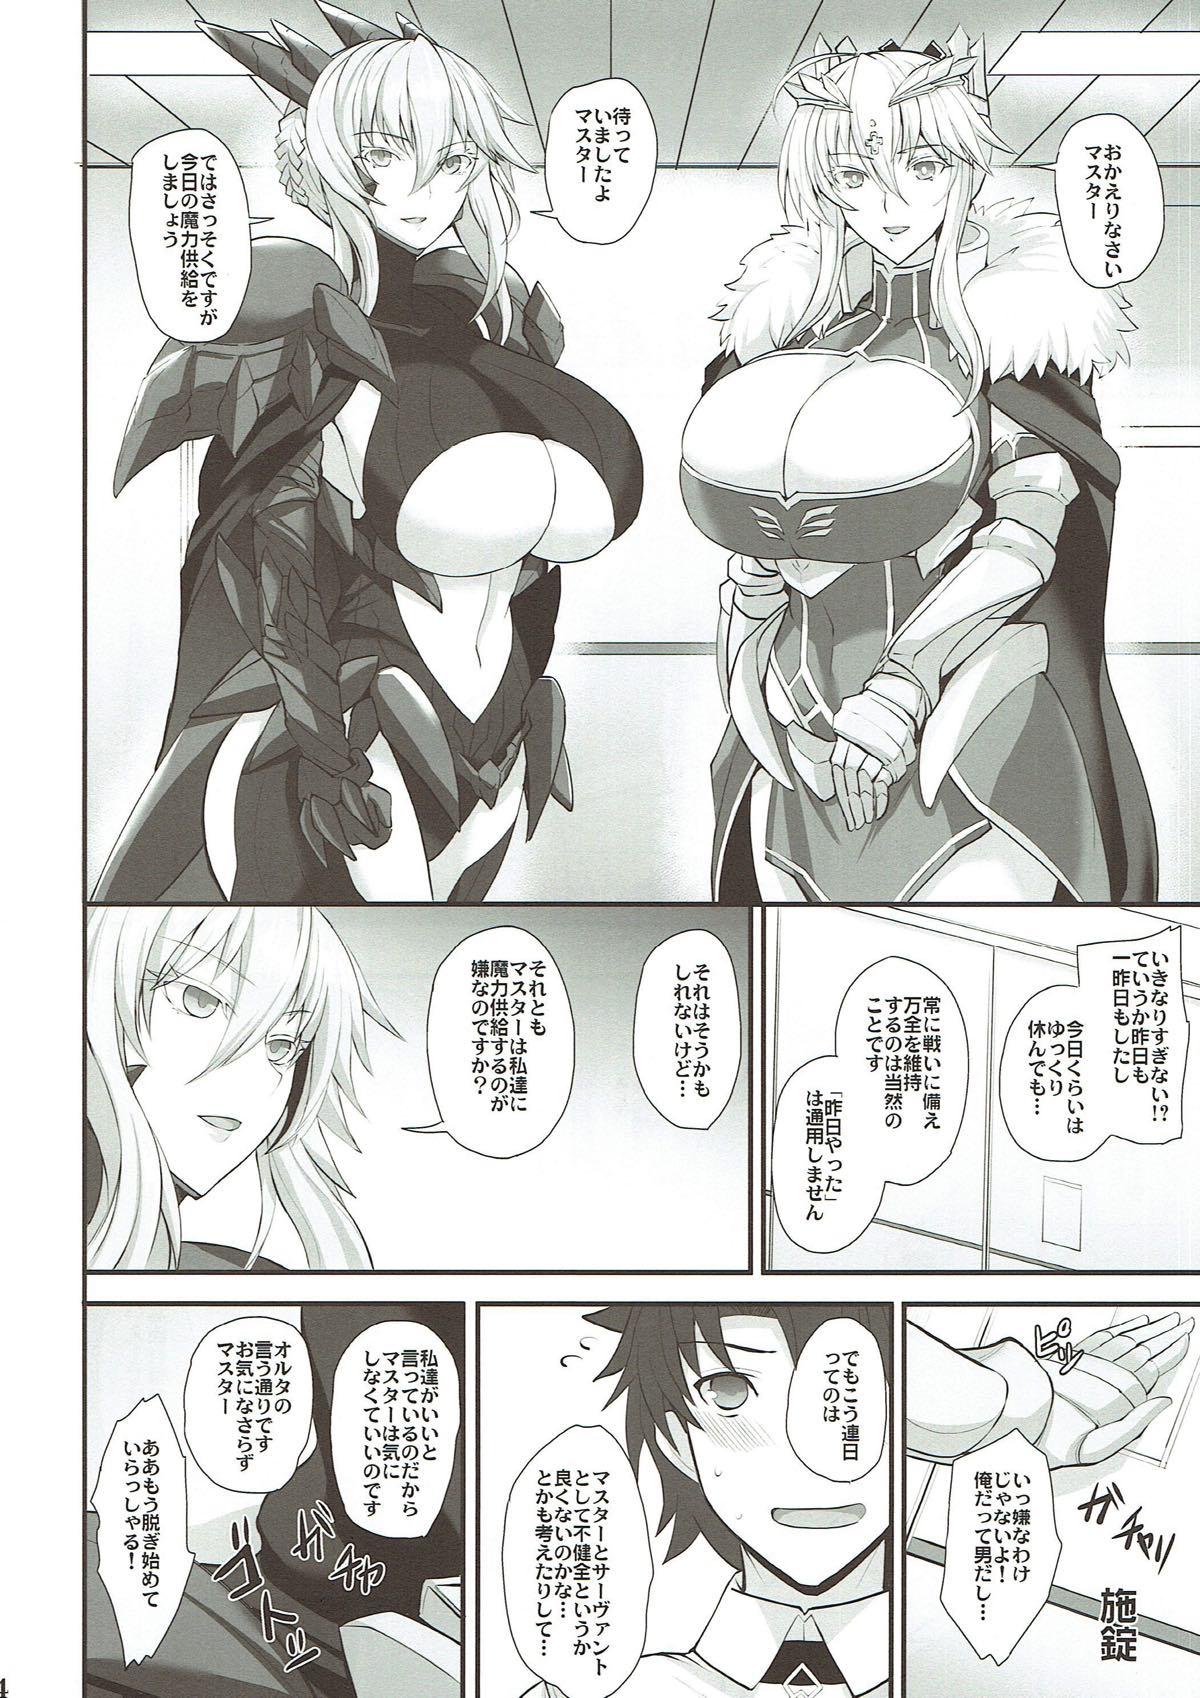 Heels Chichiue to Issho - Fate grand order Toy - Page 4